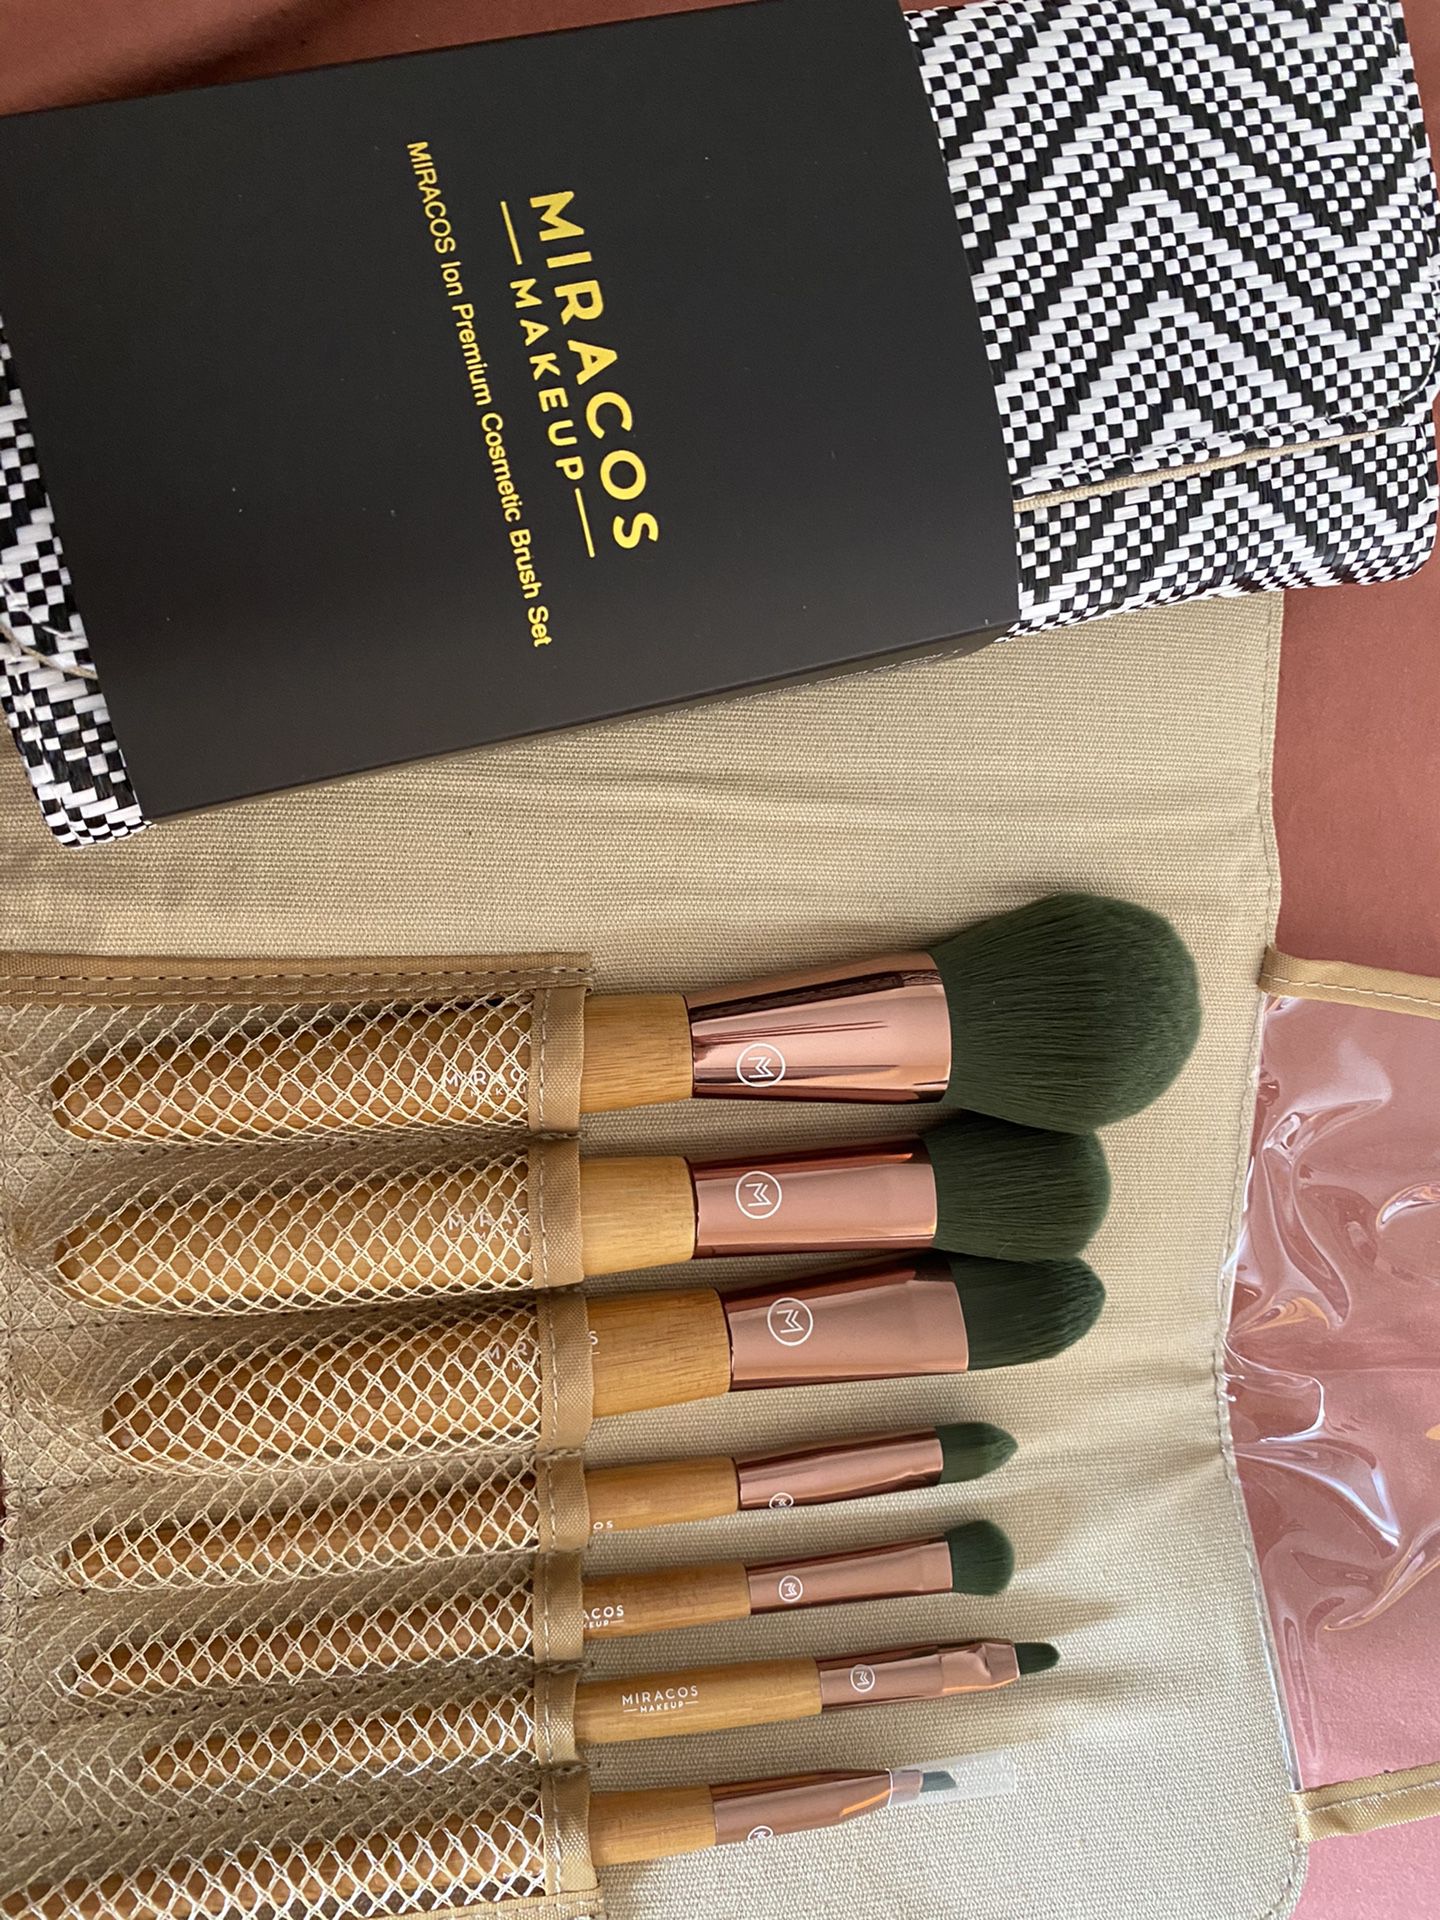 MIRACOS Makeup Brushes in set of 7💥💥💥💥